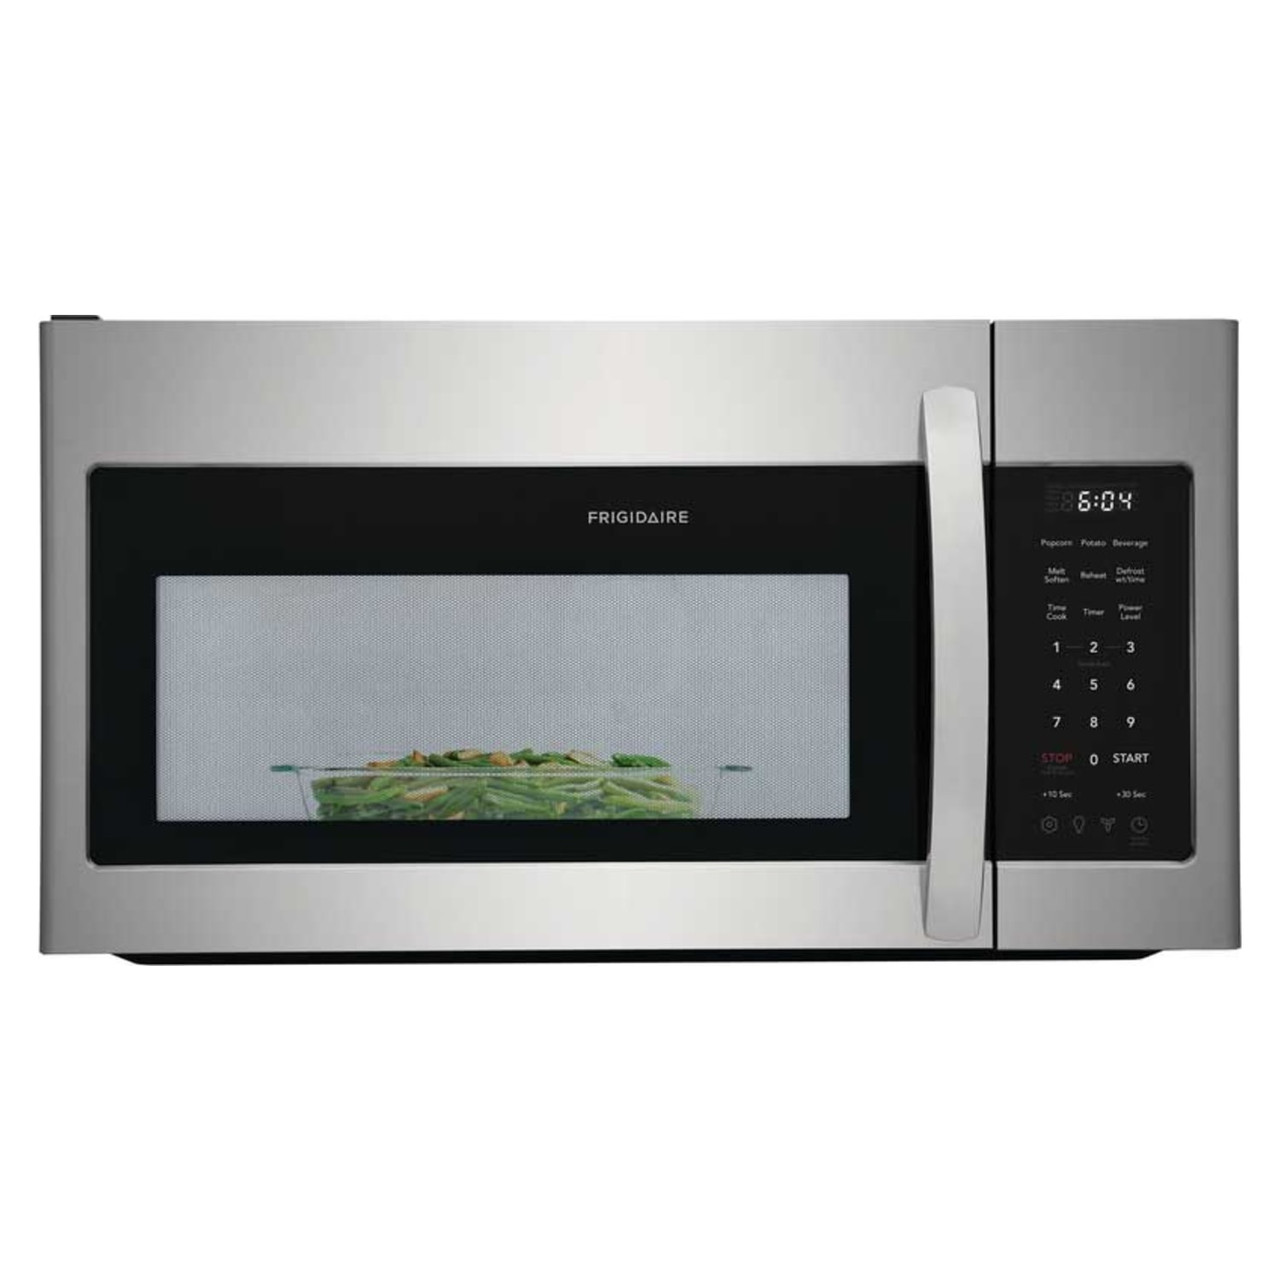 Frigidaire 1.8 cu. ft. Over-The-Range Microwave - Stainless Steel